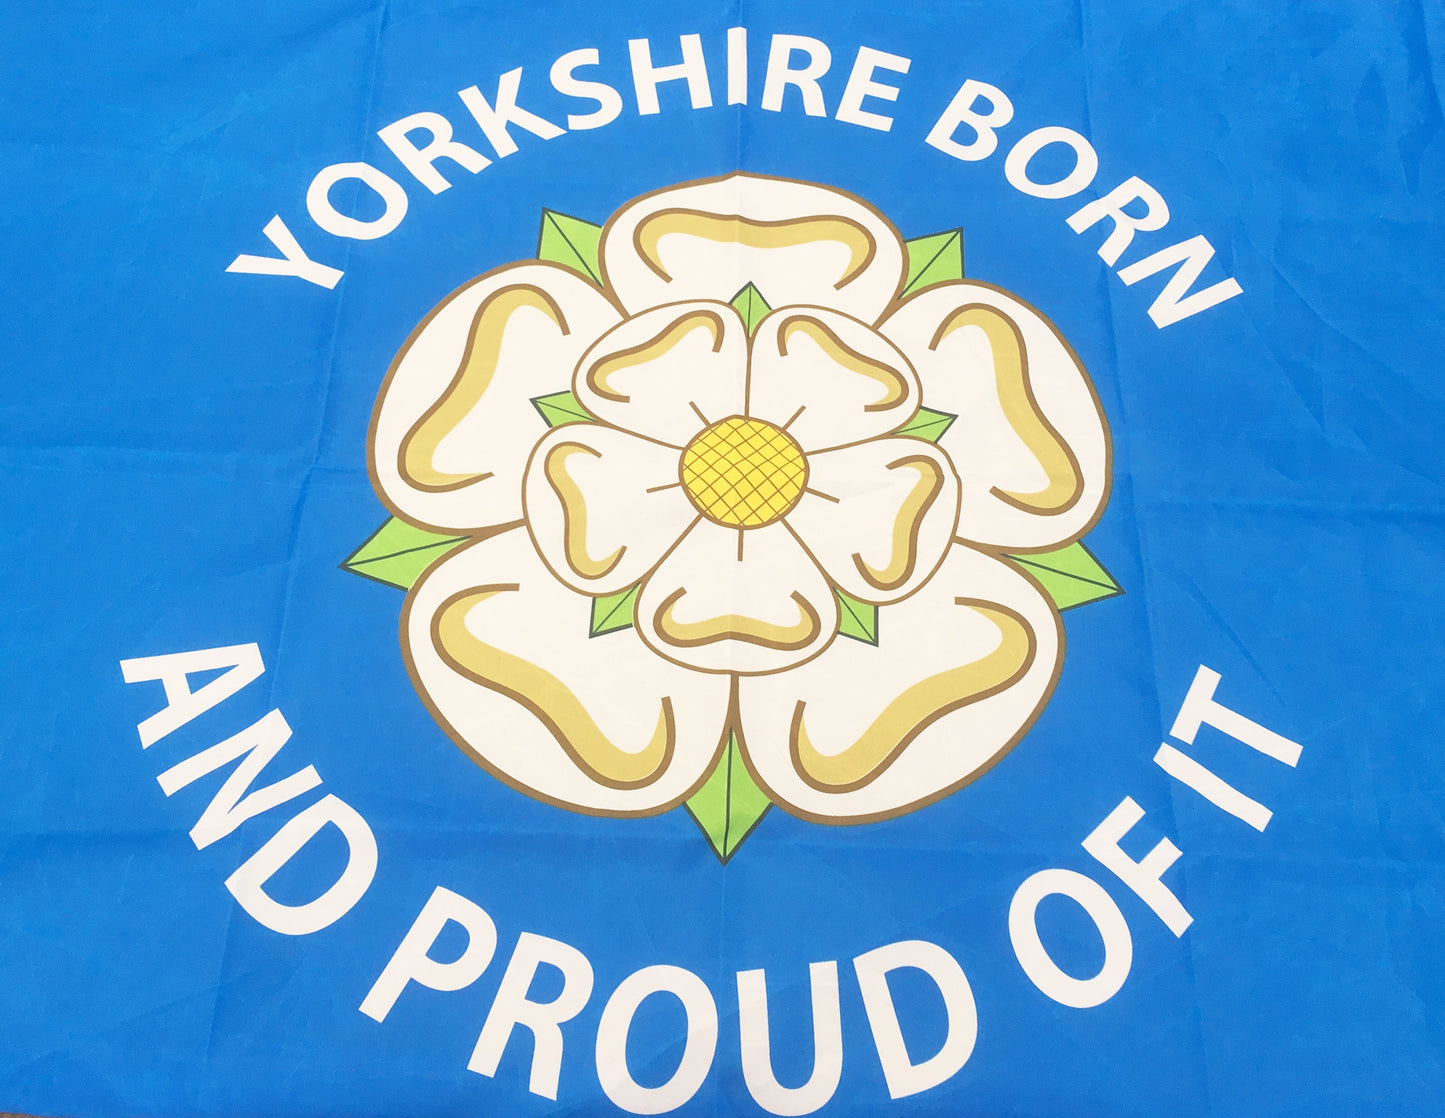 Yorkshire Born And Proud Of It Flag 5ft x 3ft - Last Few!